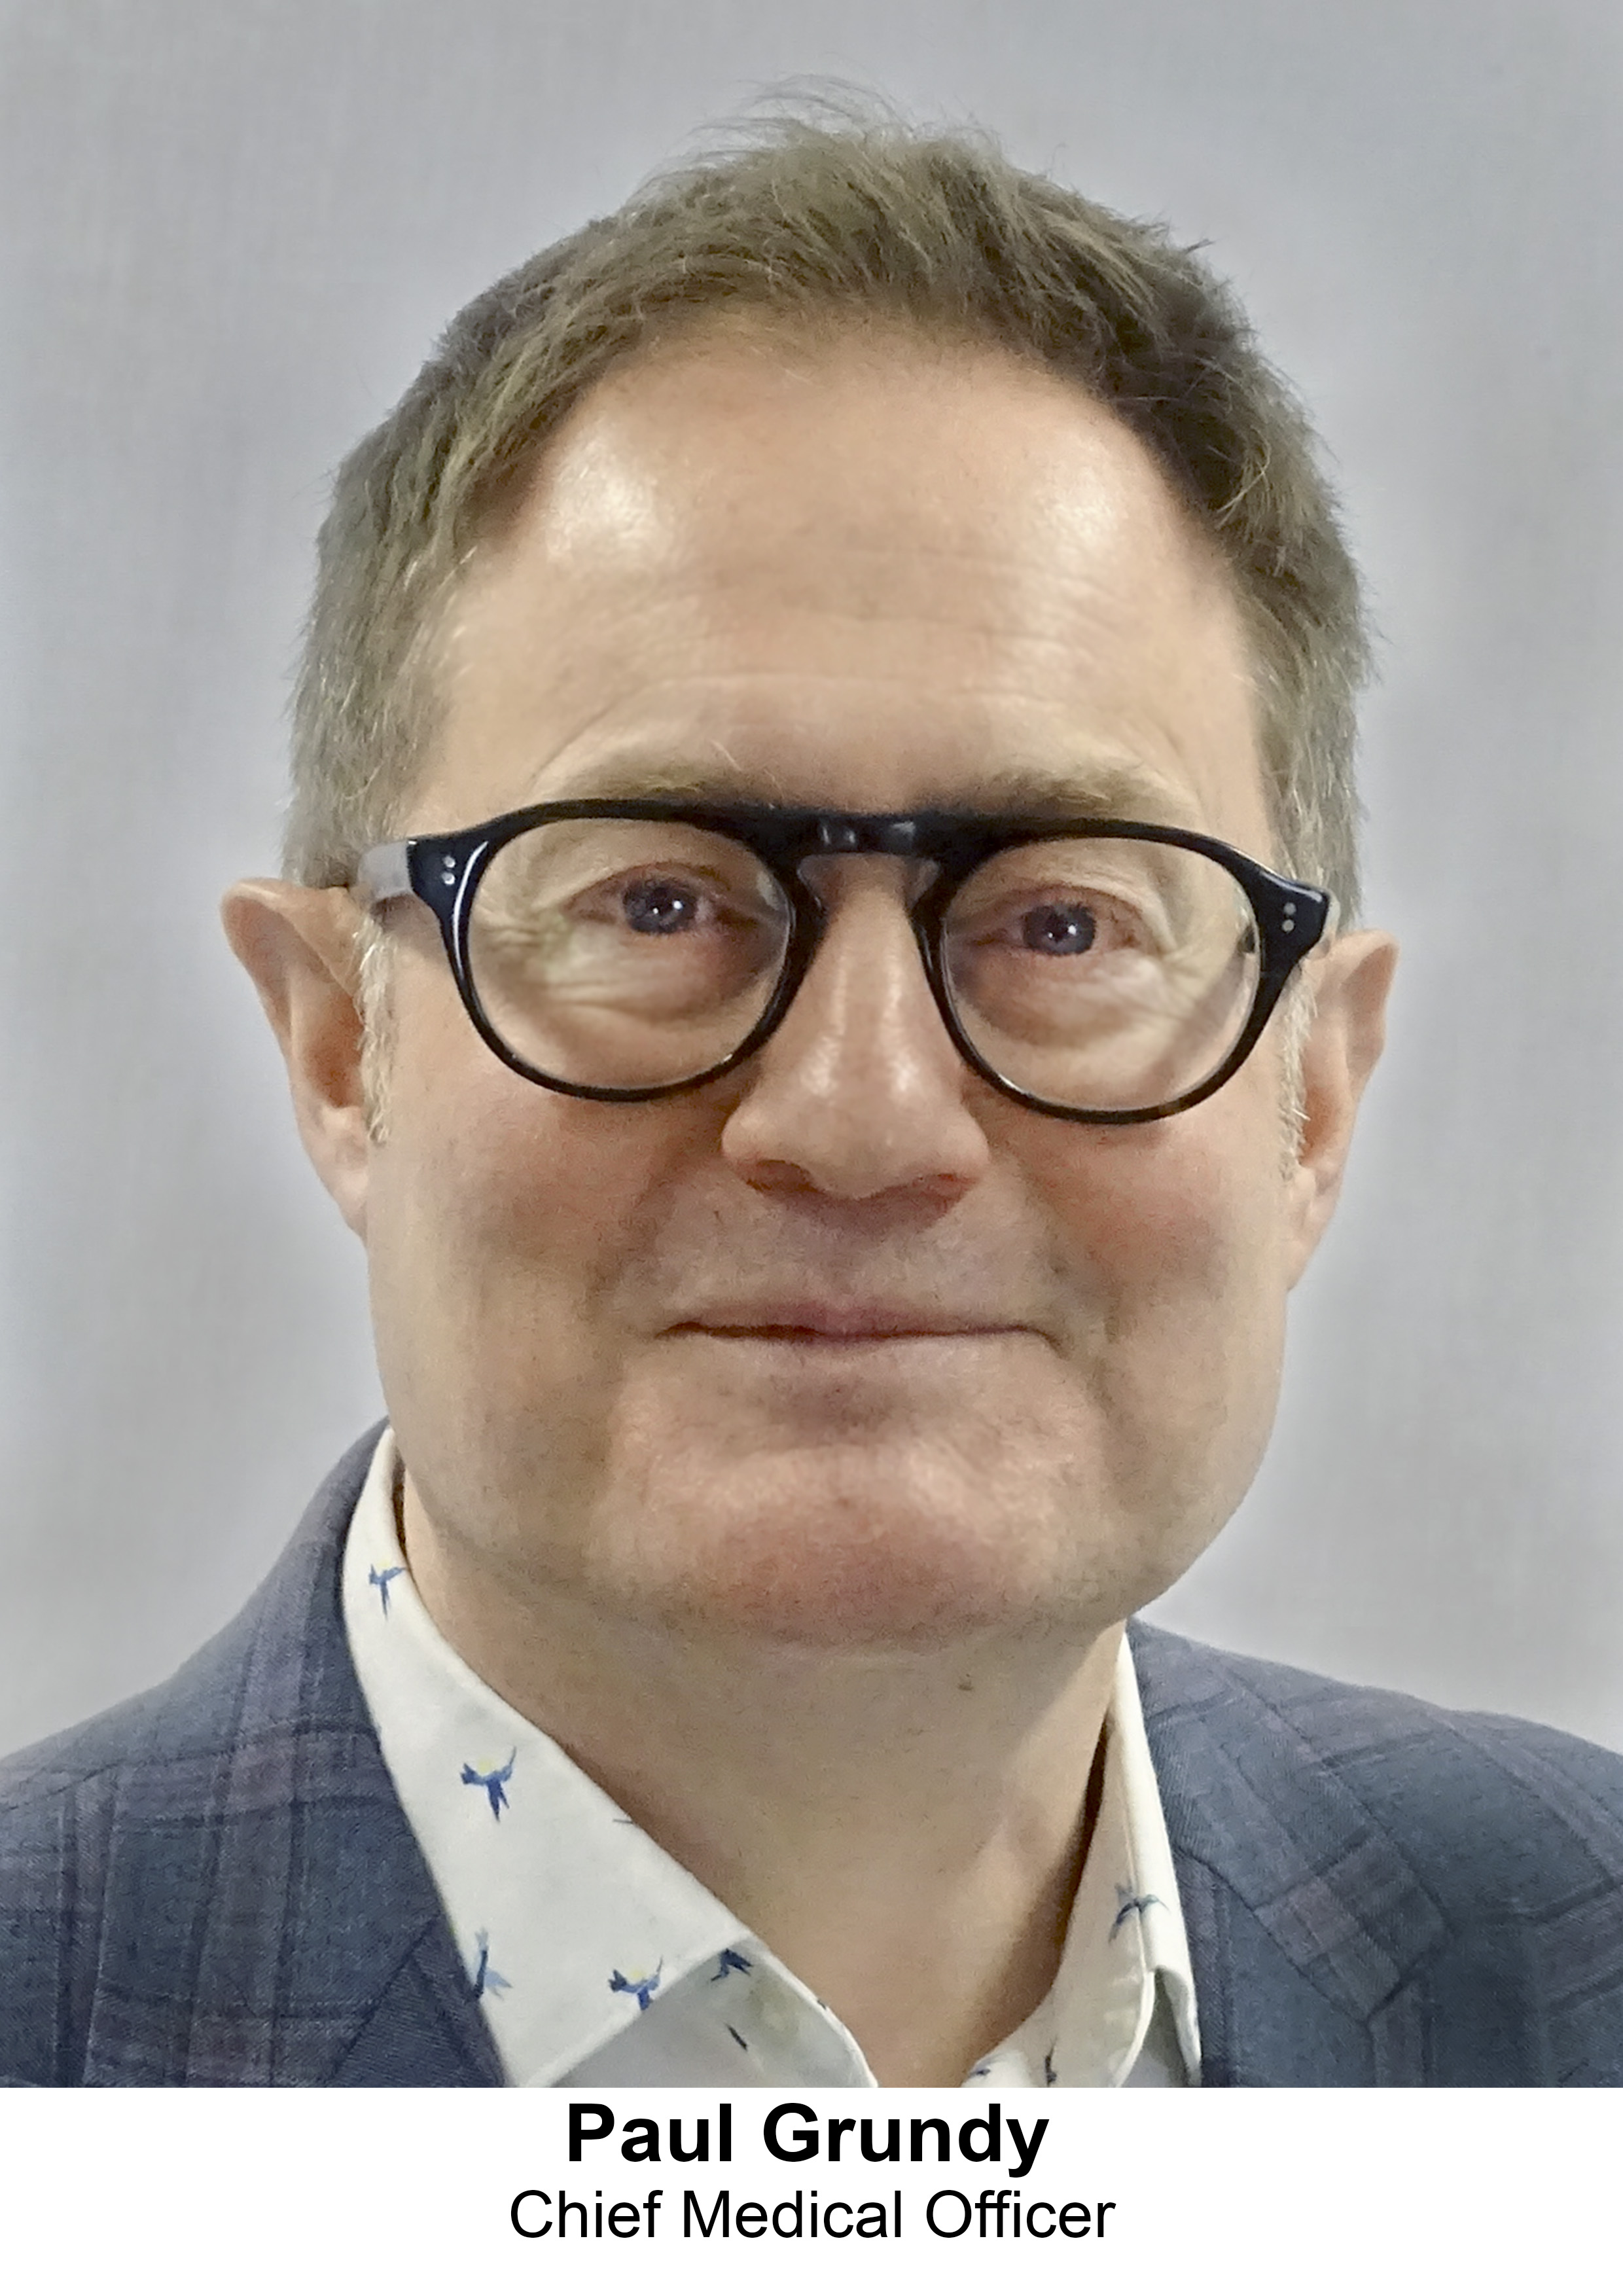 Paul Grundy, chief medical officer